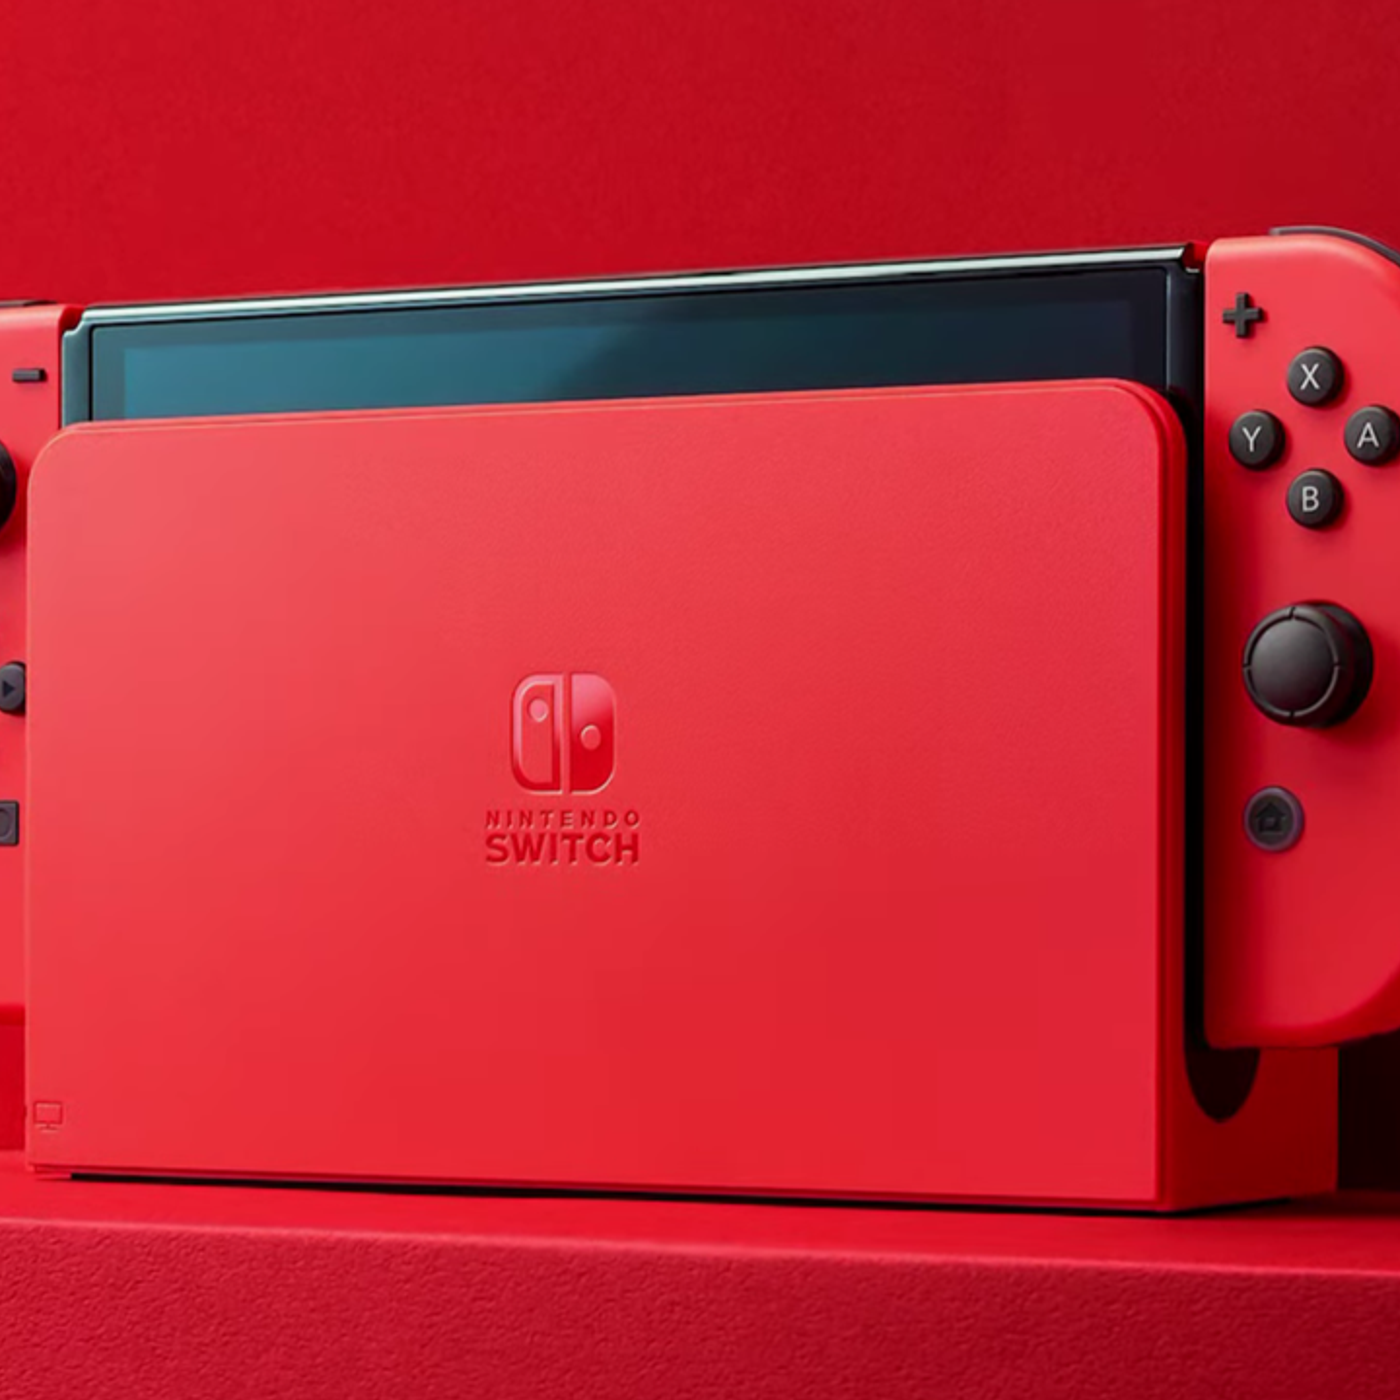 S19 Ep1324: Rumor: Switch 2 ‘will have an 8-inch LCD screen'